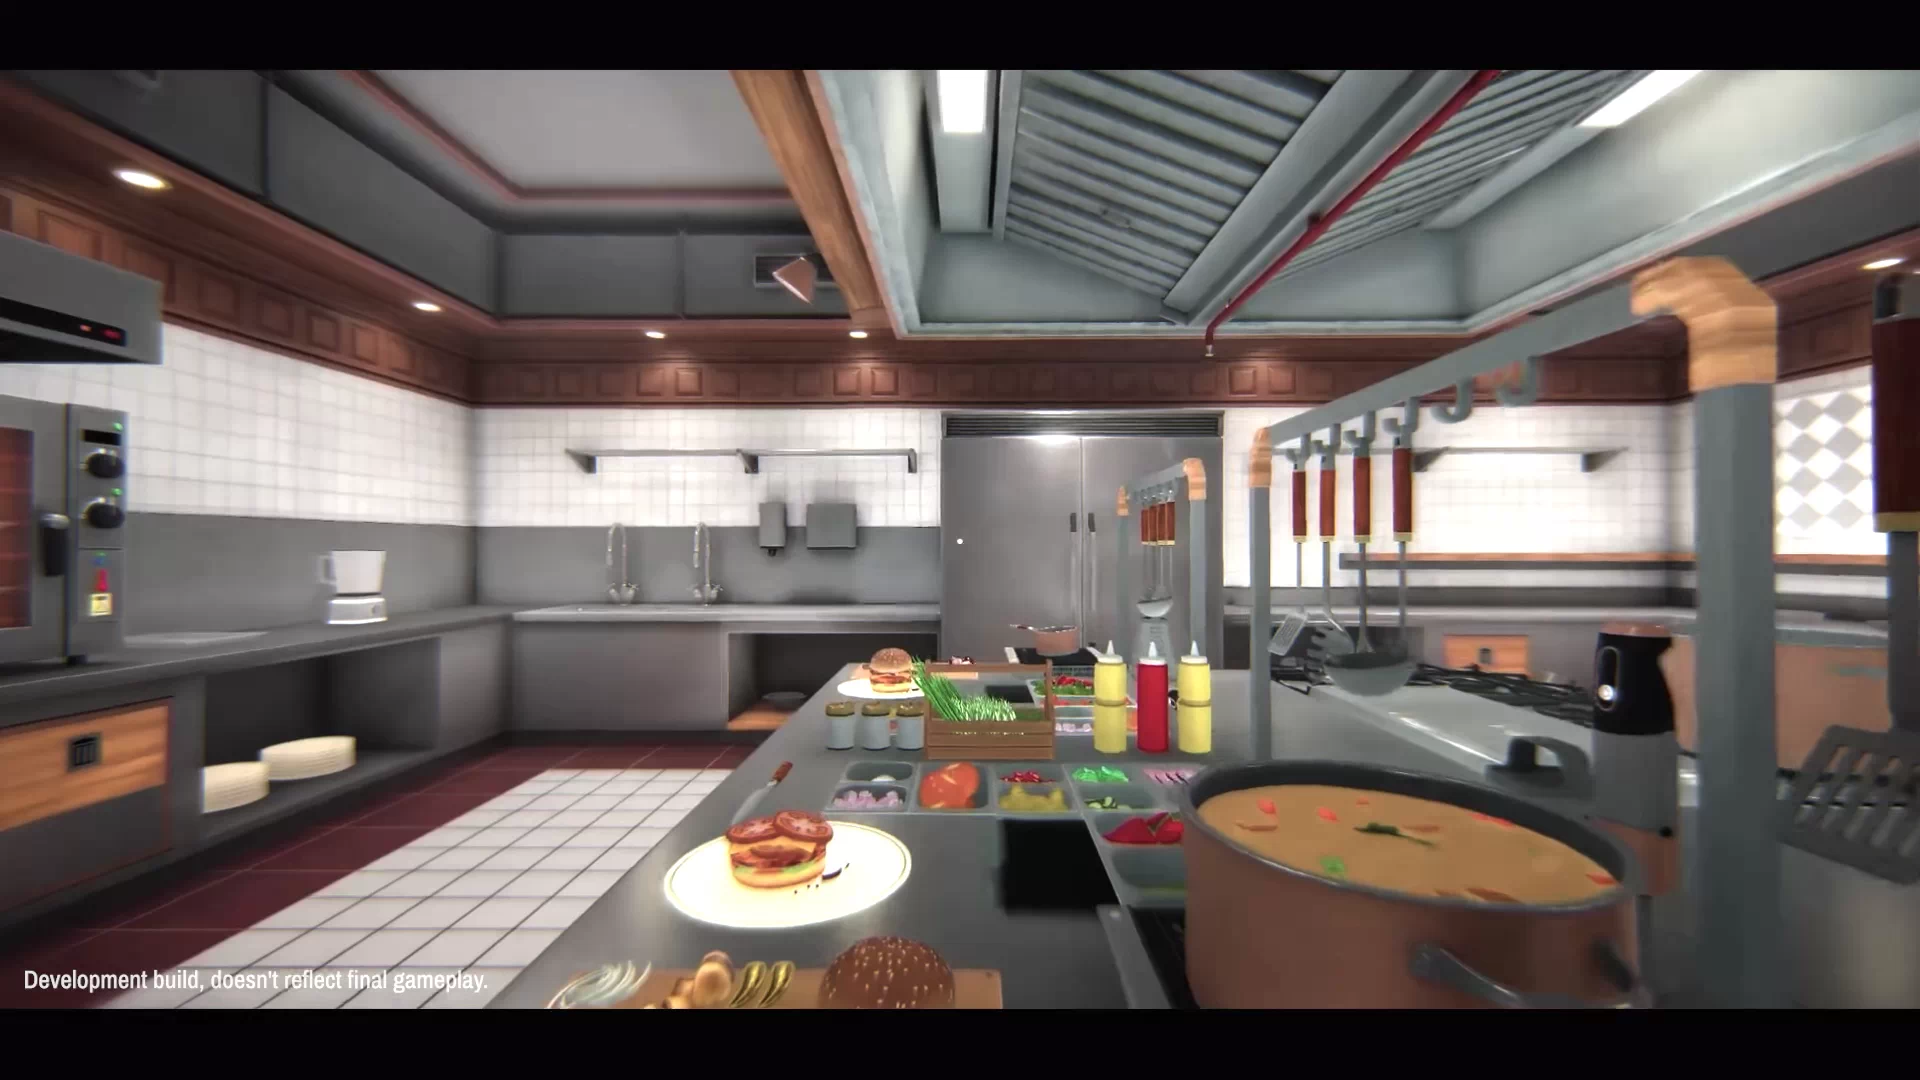 Cooking Simulator 2: Better Together